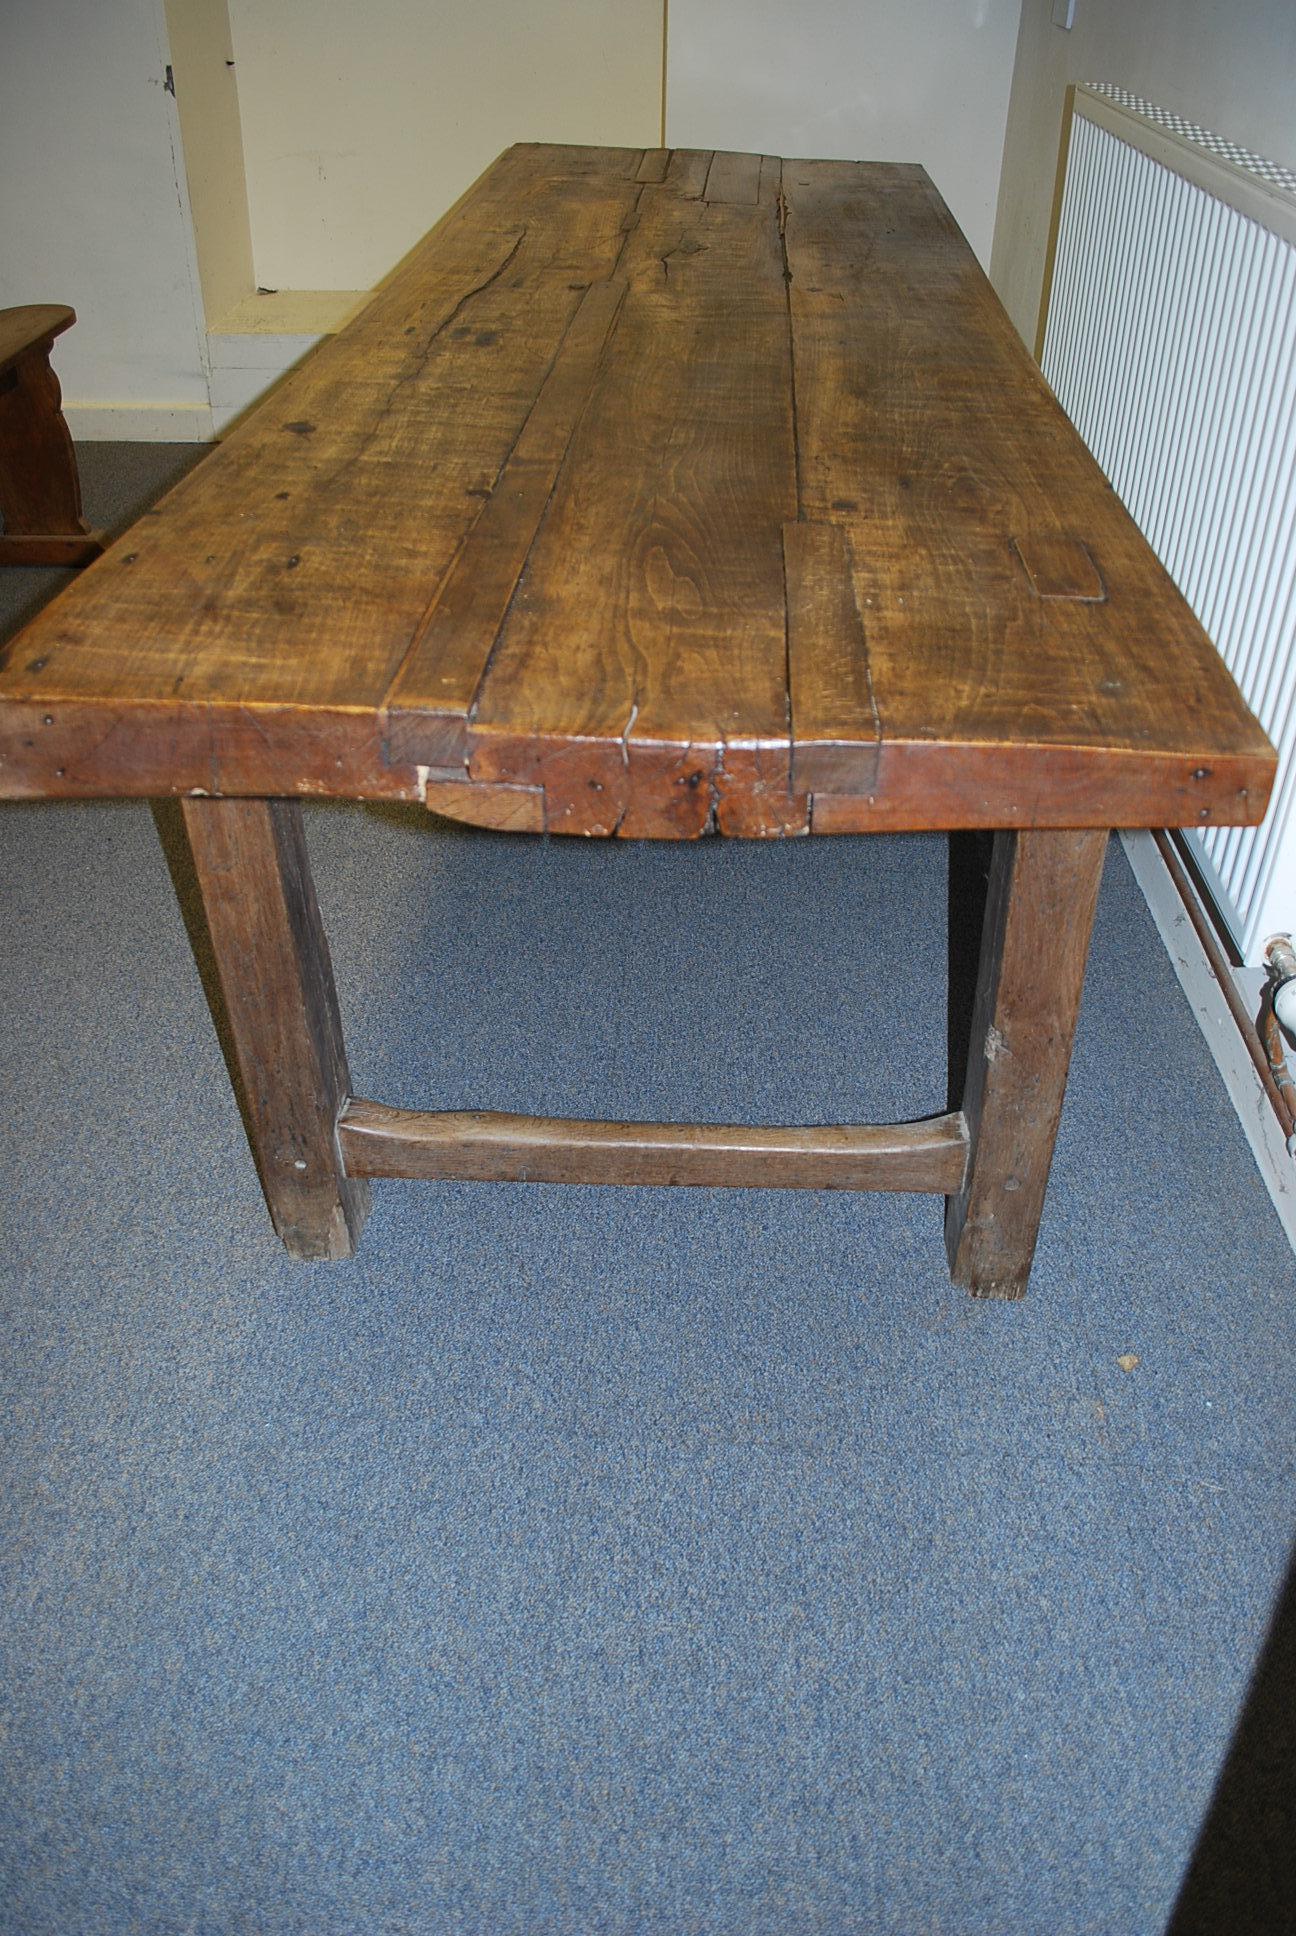 A rare 18th Century French farmhouse table with a nice thick top and excellent color and patination. Lots of old patches to the top and worn stretchers at you would expect from a table of this age. A real statement piece with plenty of character,